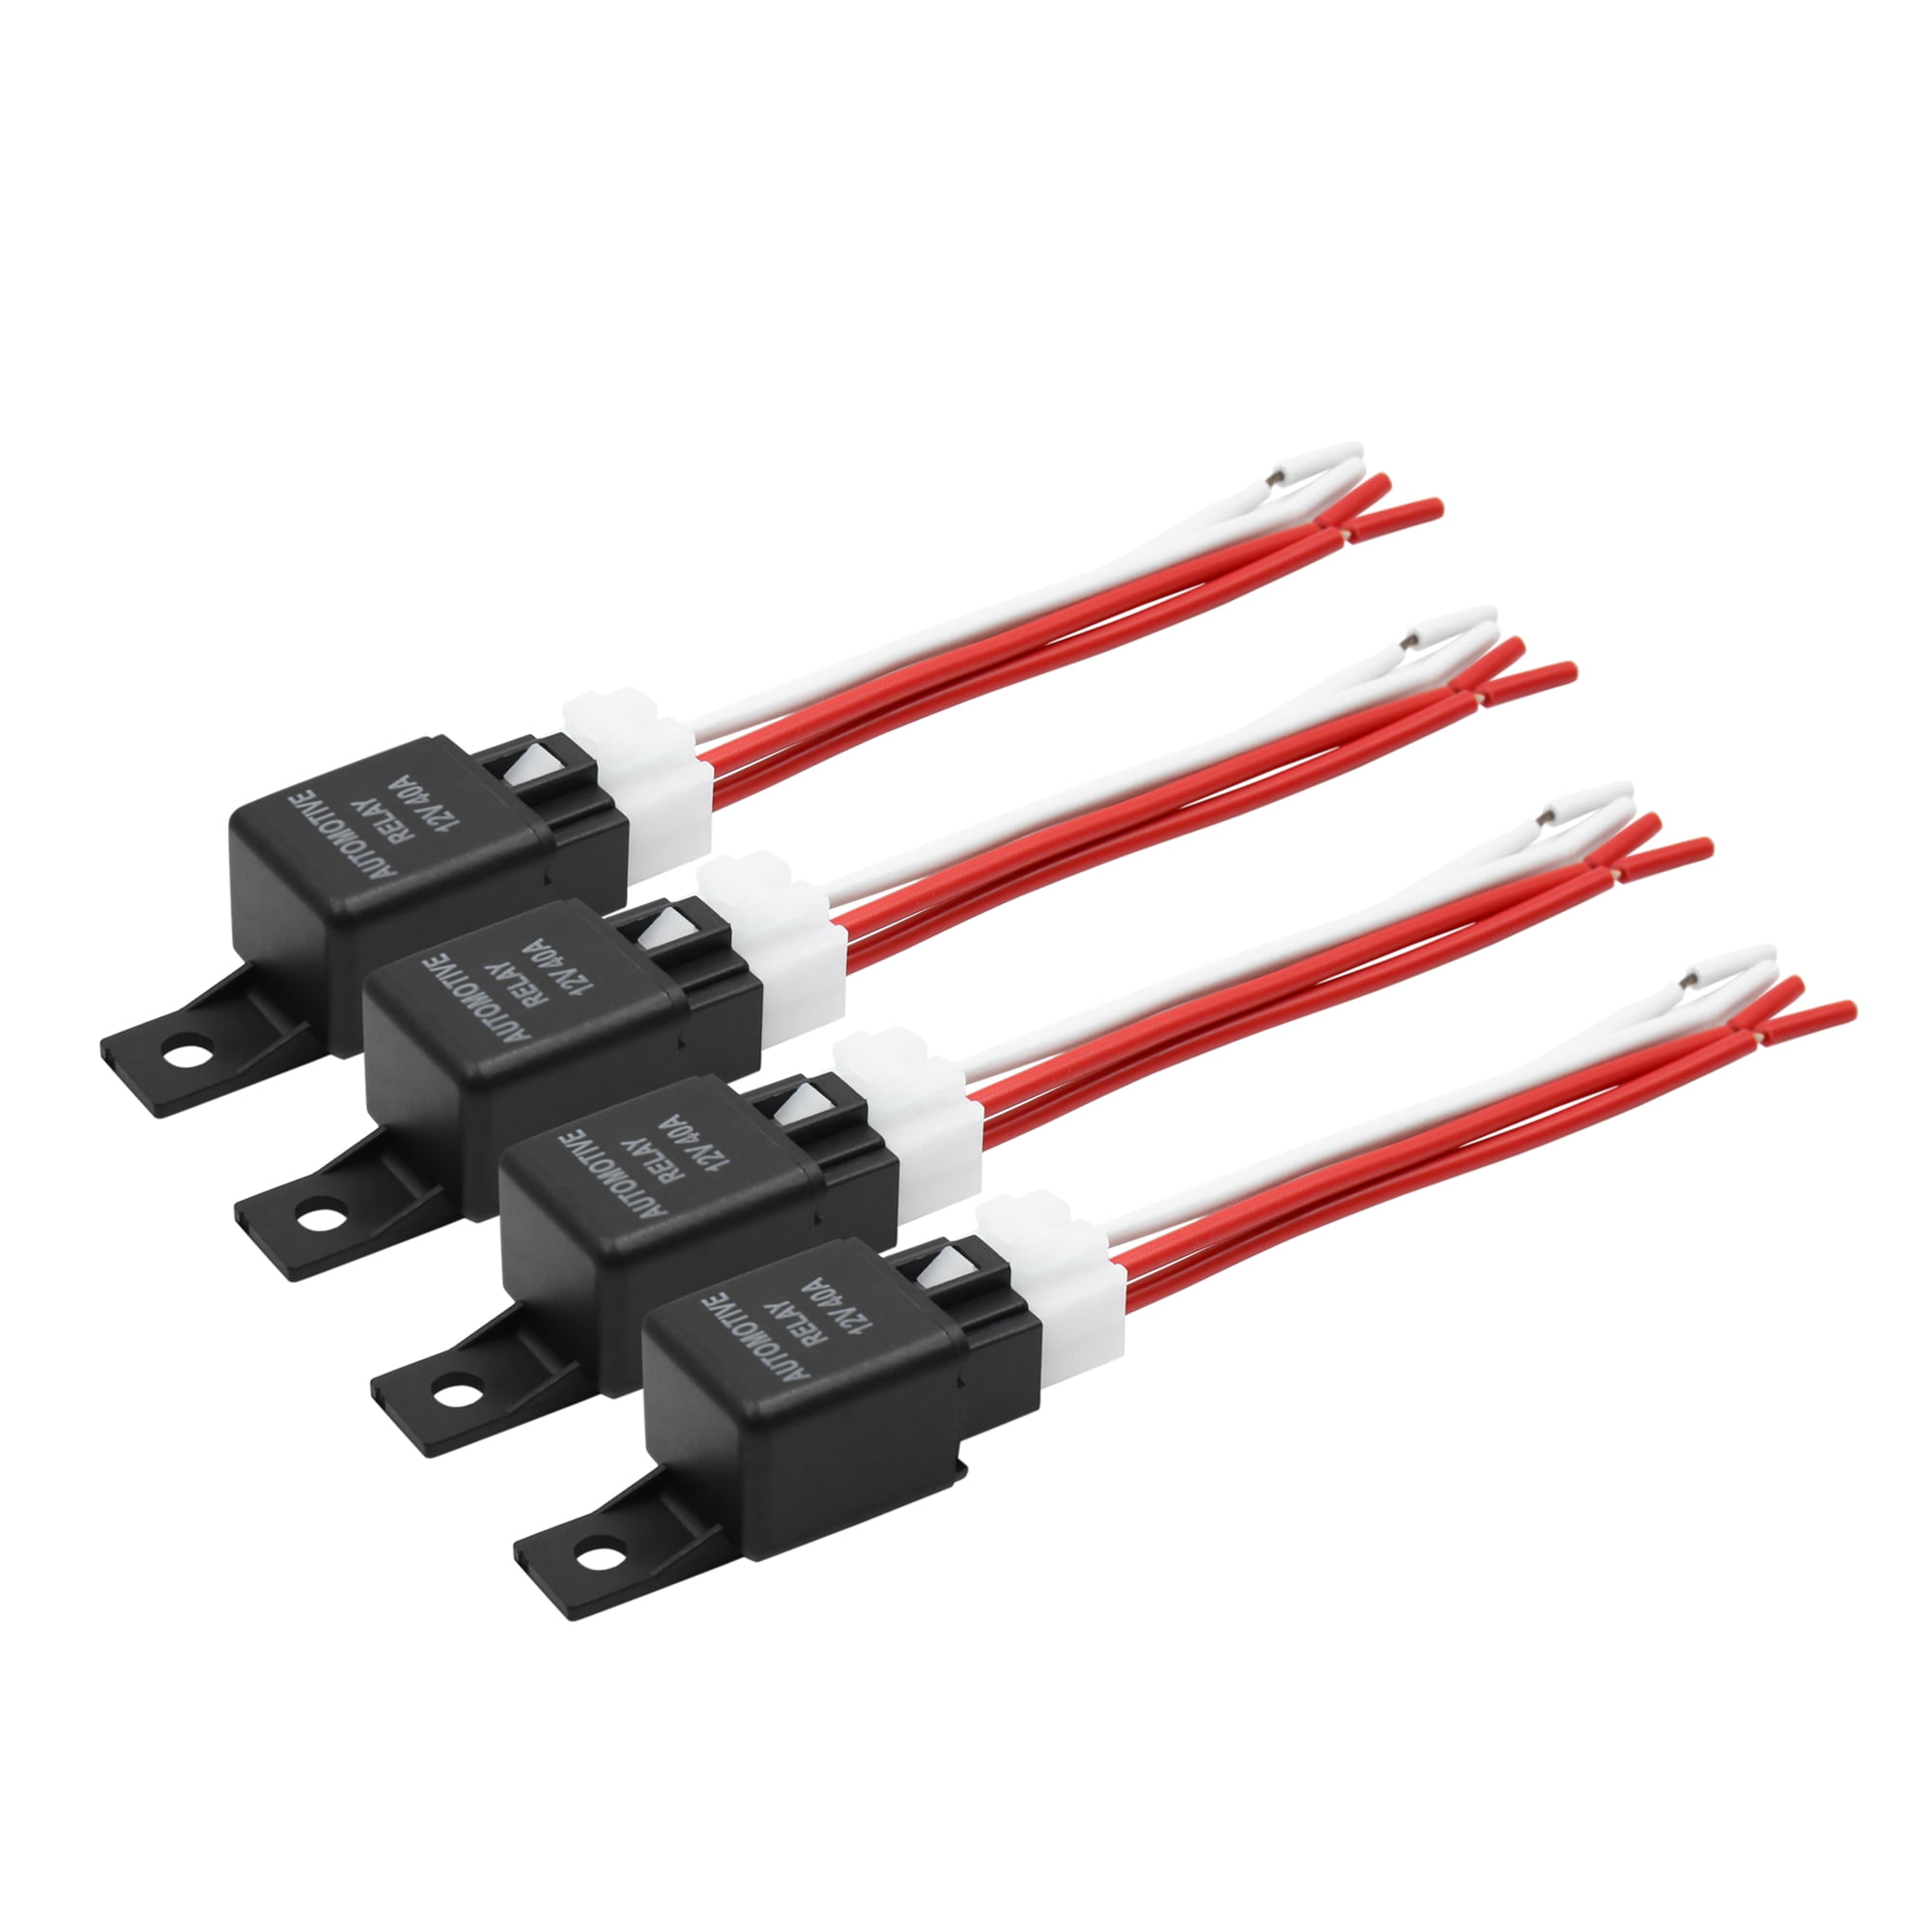 4PCS 12V Automotive Changeover Relay 40A 5-Pin With Socket Holder Black Shell 